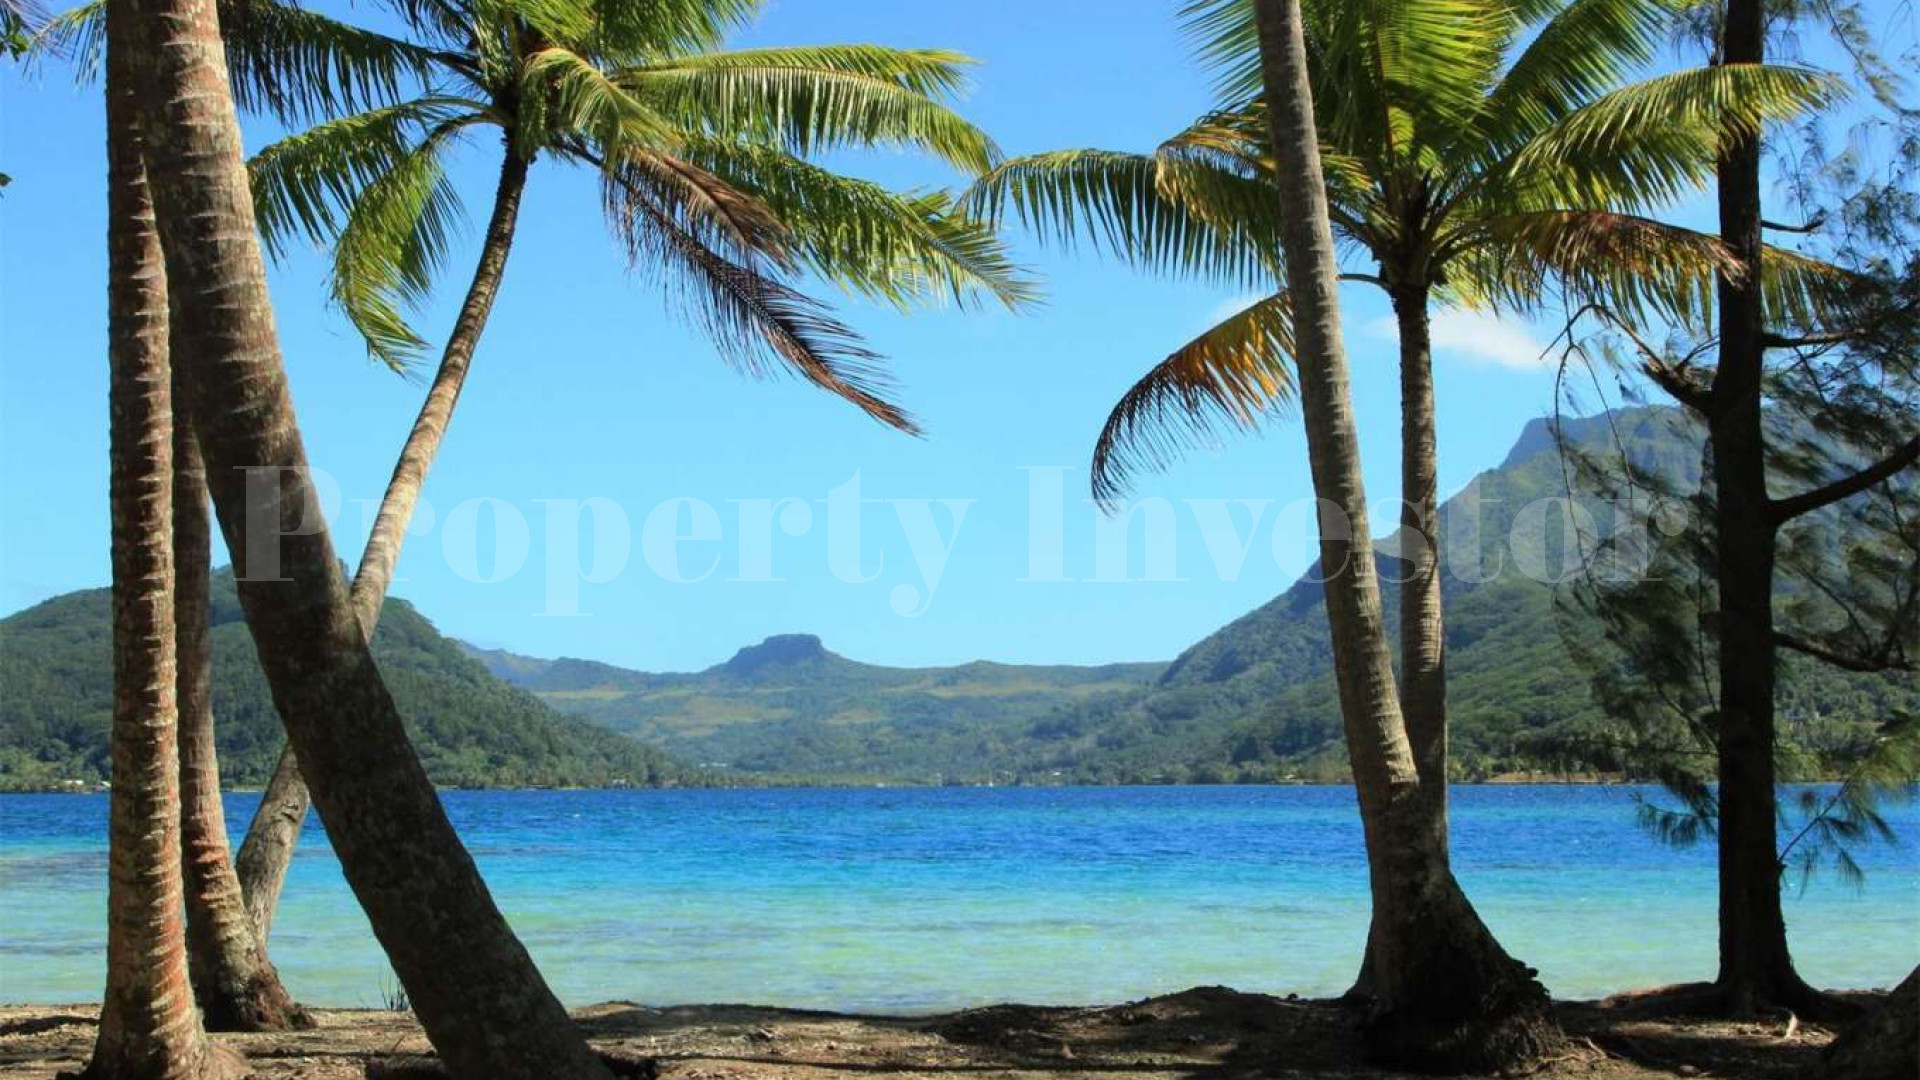 Virgin 12.9 Hectare Private Island for Sale in French Polynesia